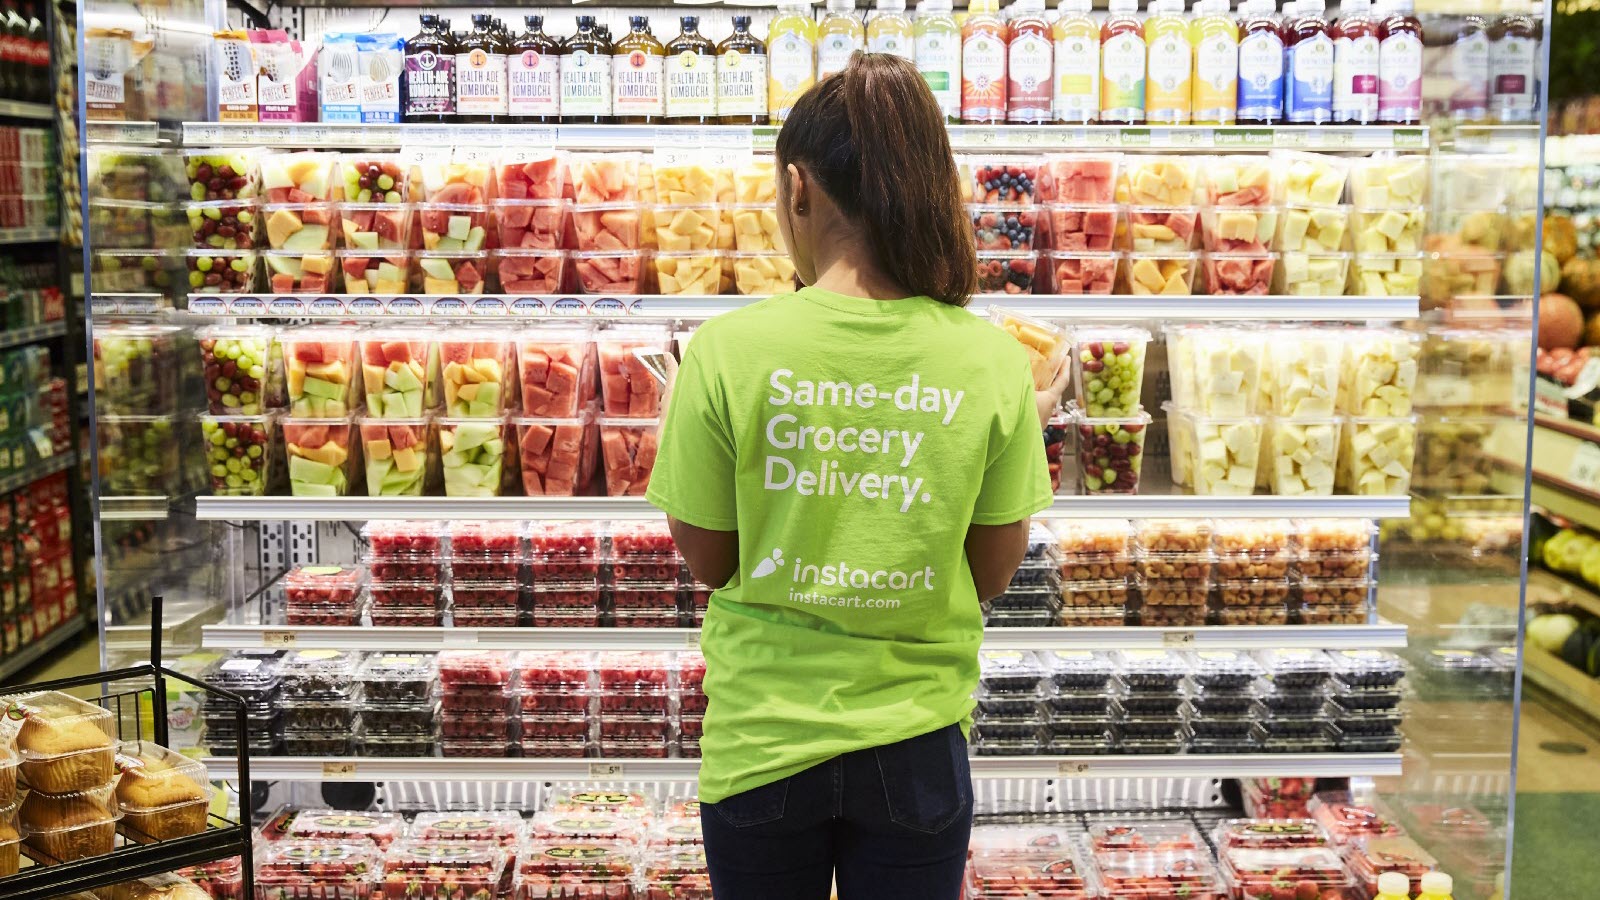 Instacart Admits Two Contract Workers Accessed Person Data Inappropriately